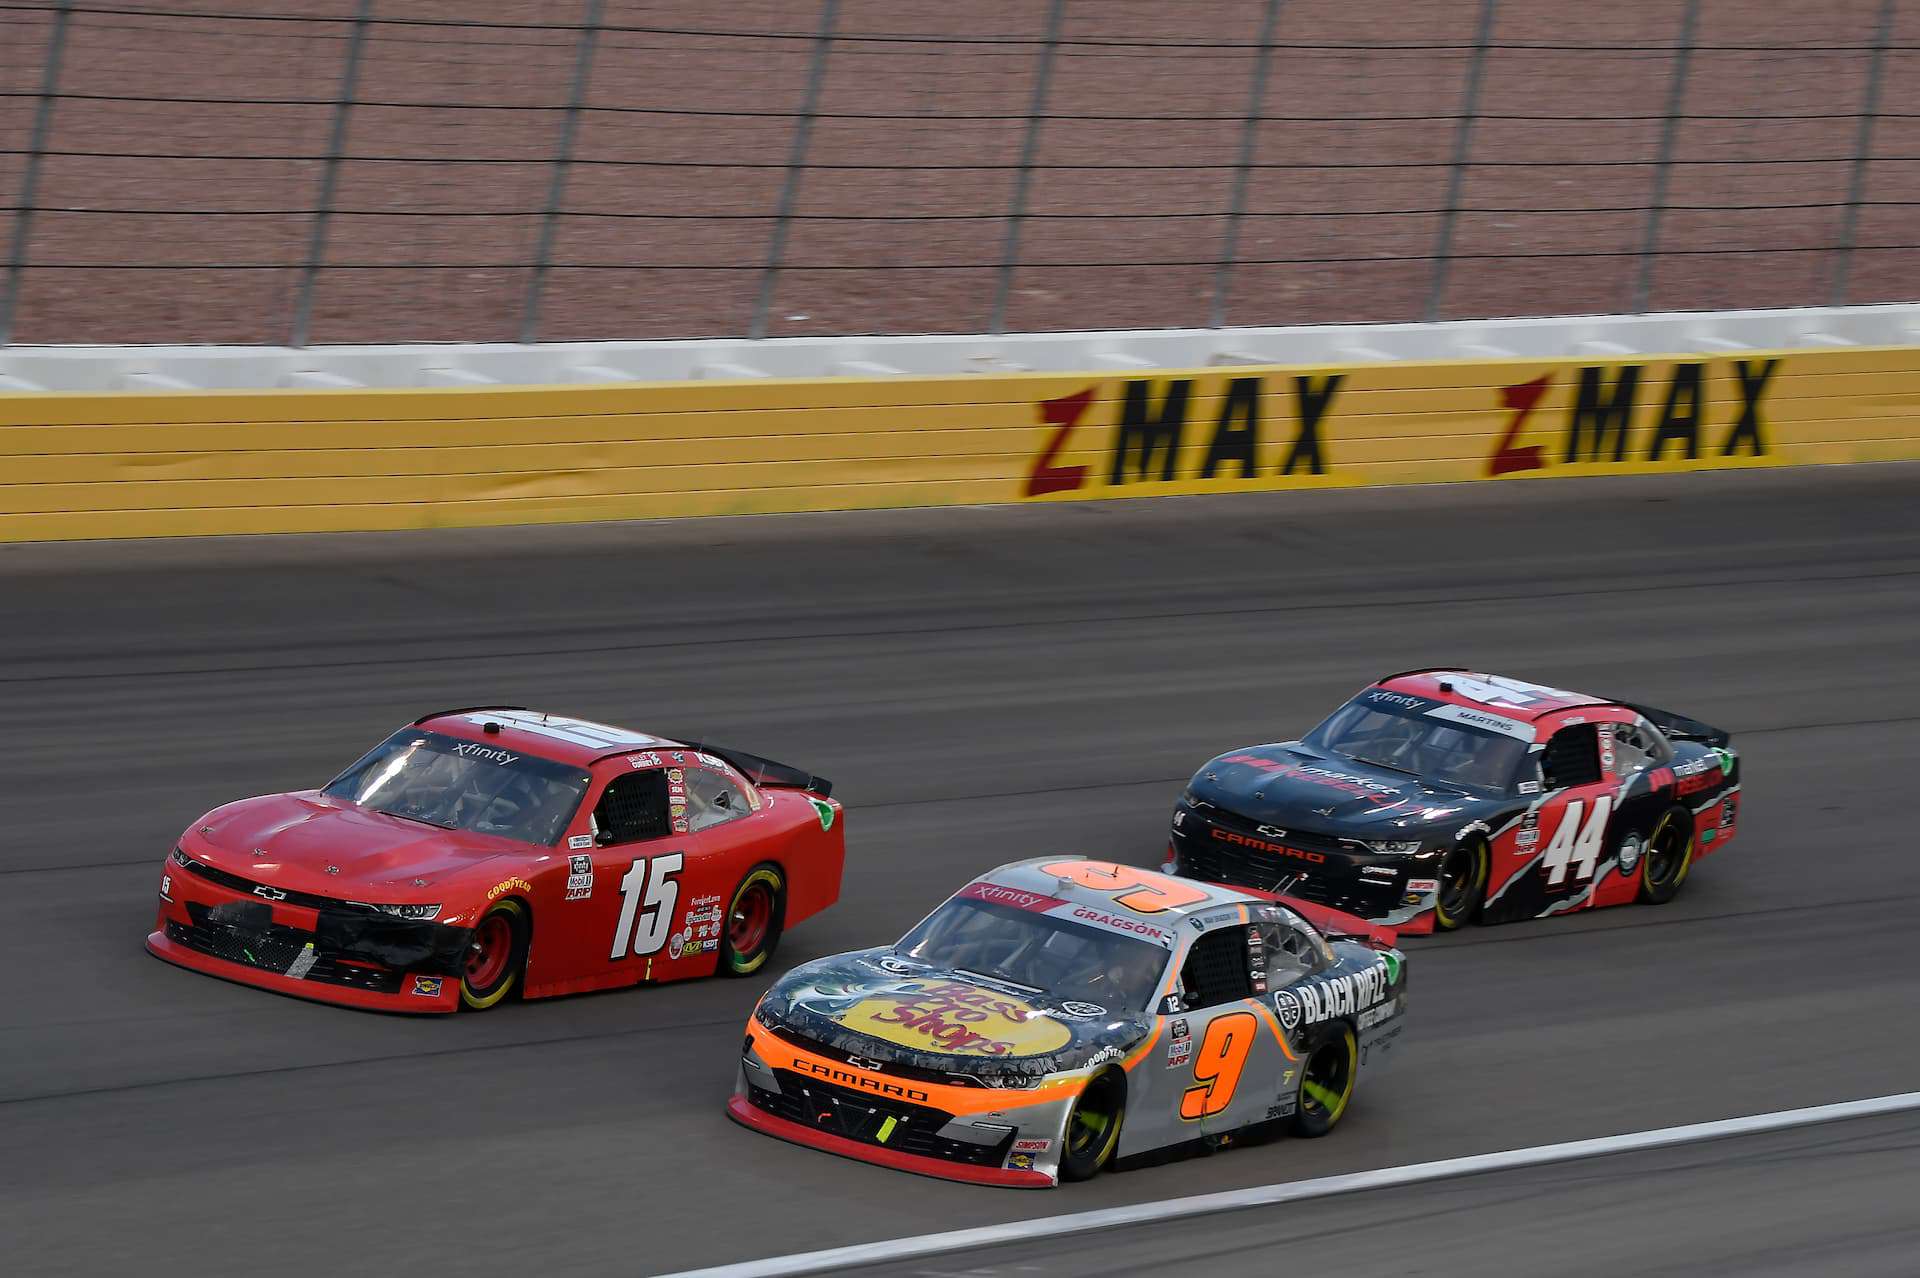 Tommy Joe Martins races at Las Vegas Motor Speedway in the 2021 Alsco Uniforms 302 in the NASCAR Xfinity Series. Photo by Nigel Kinrade Photography.